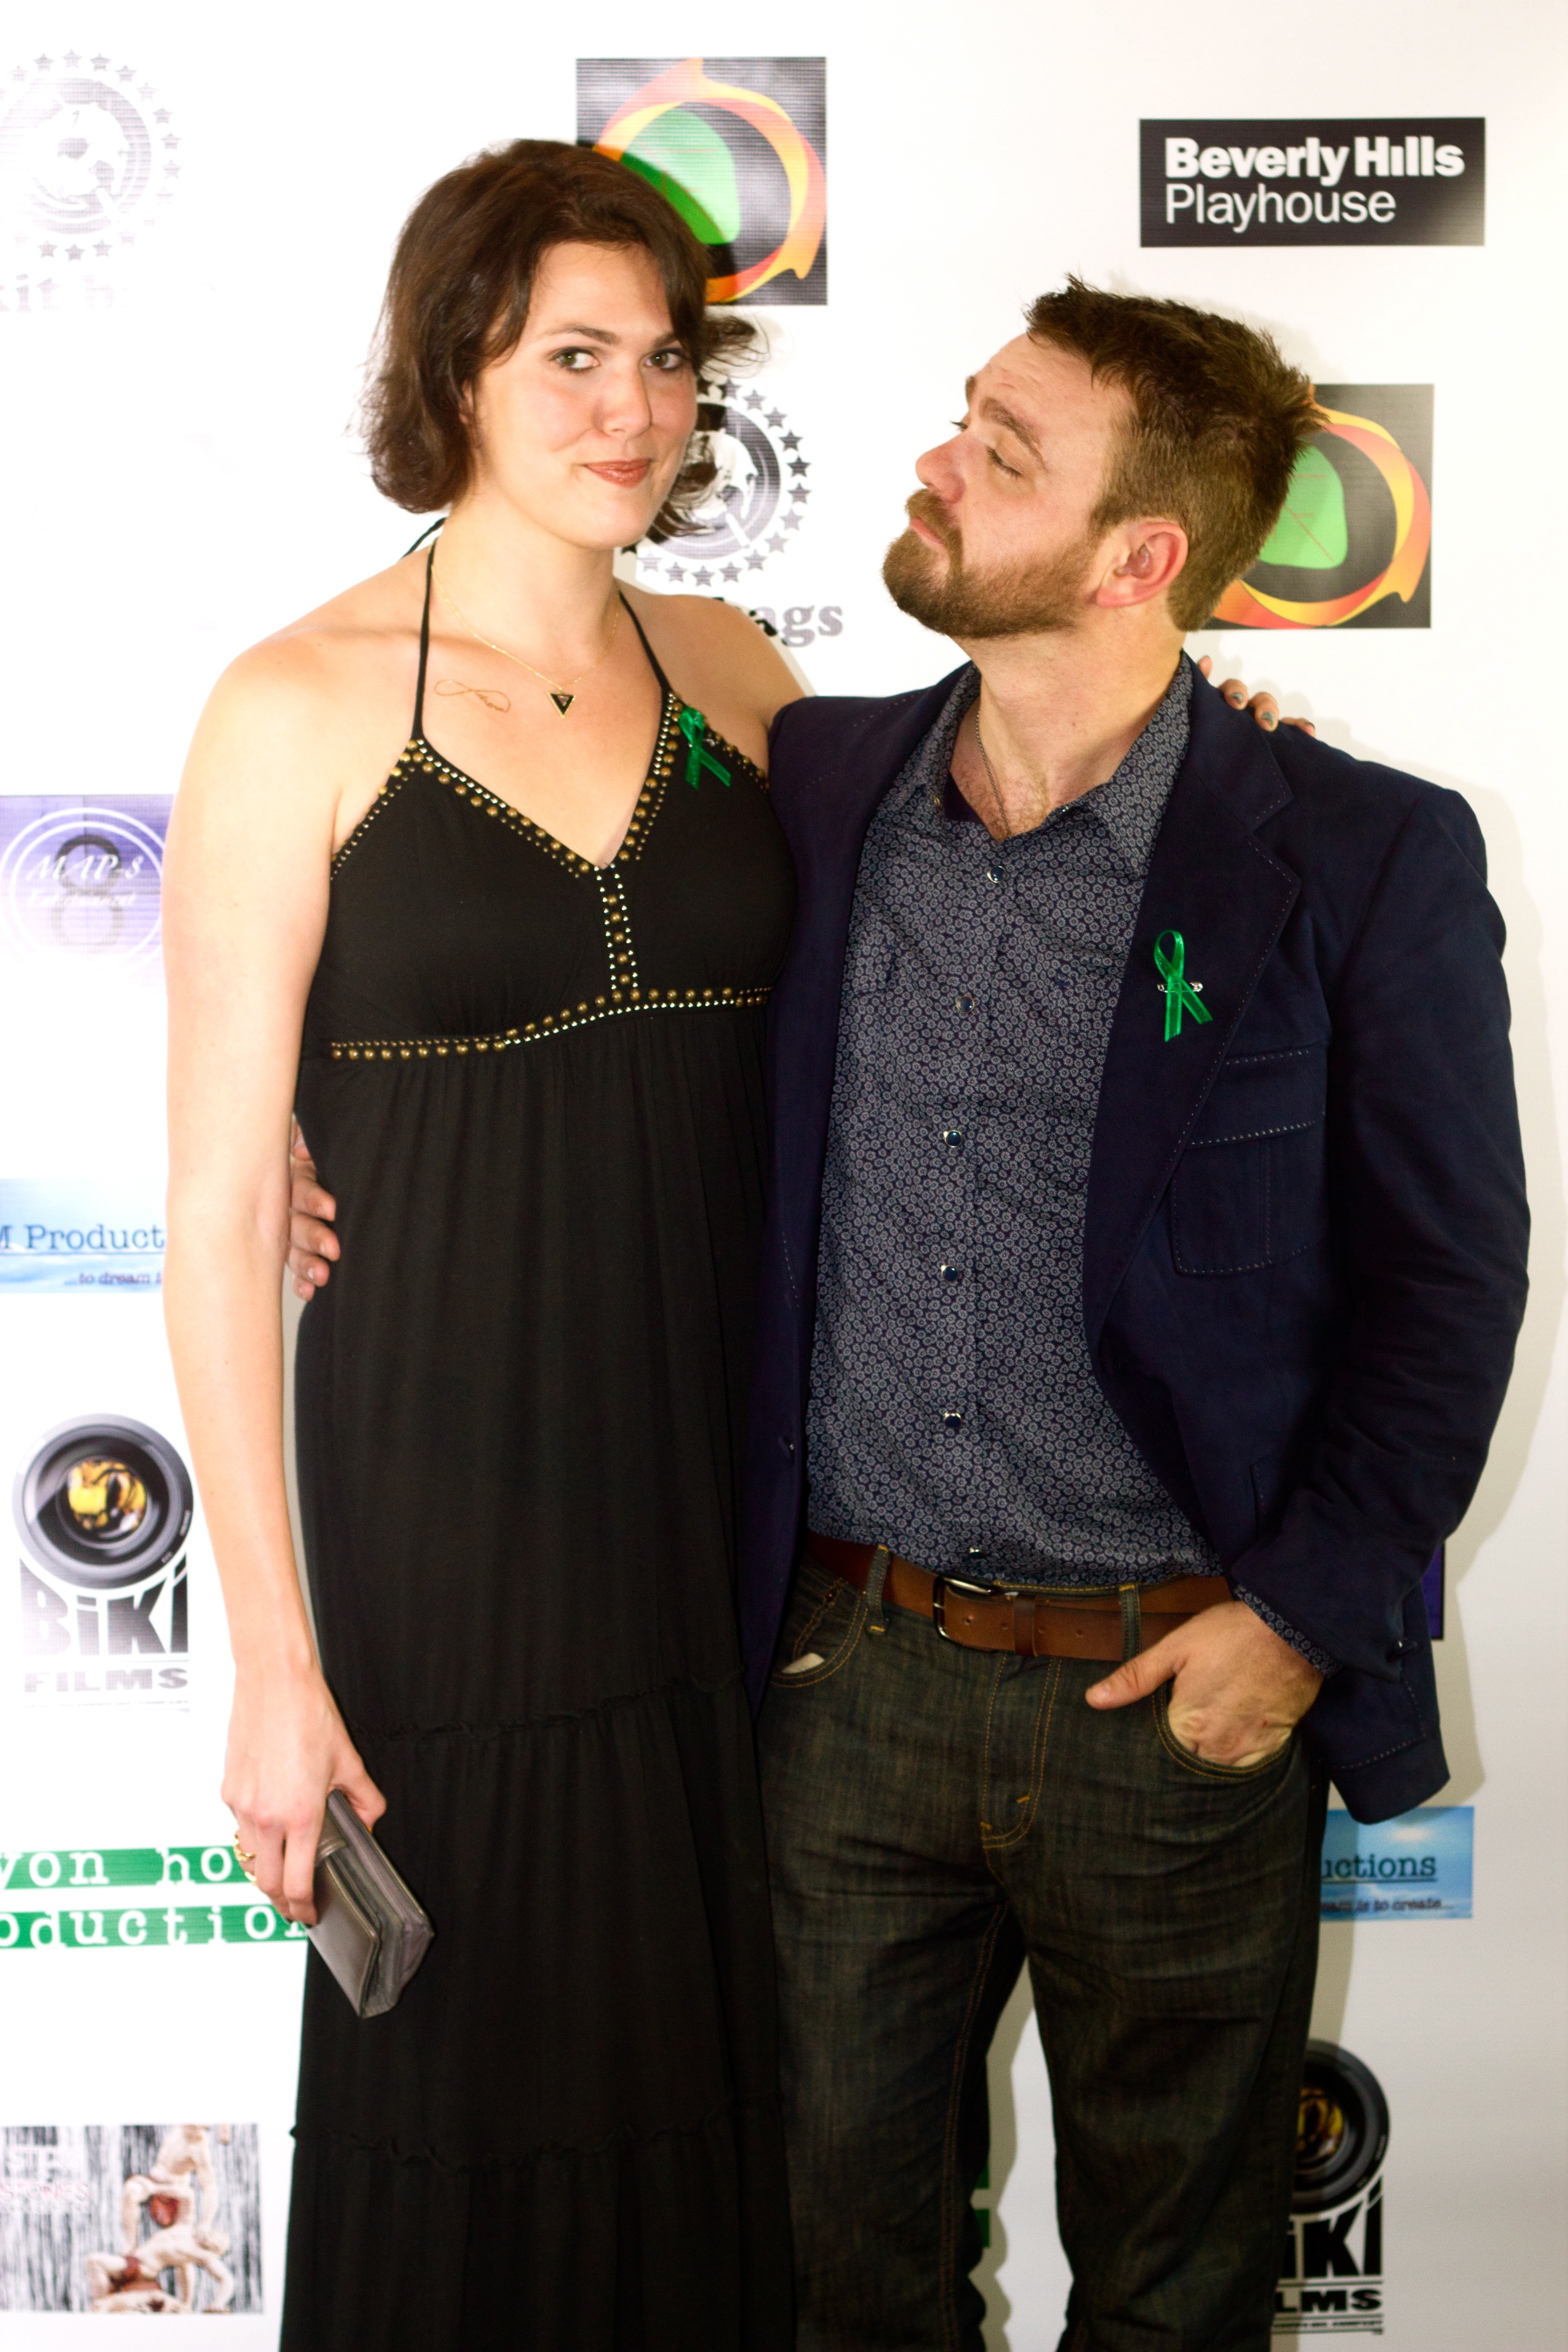 Rachael Meyers and Bryan McKinley at the BHP Film Fest 2014